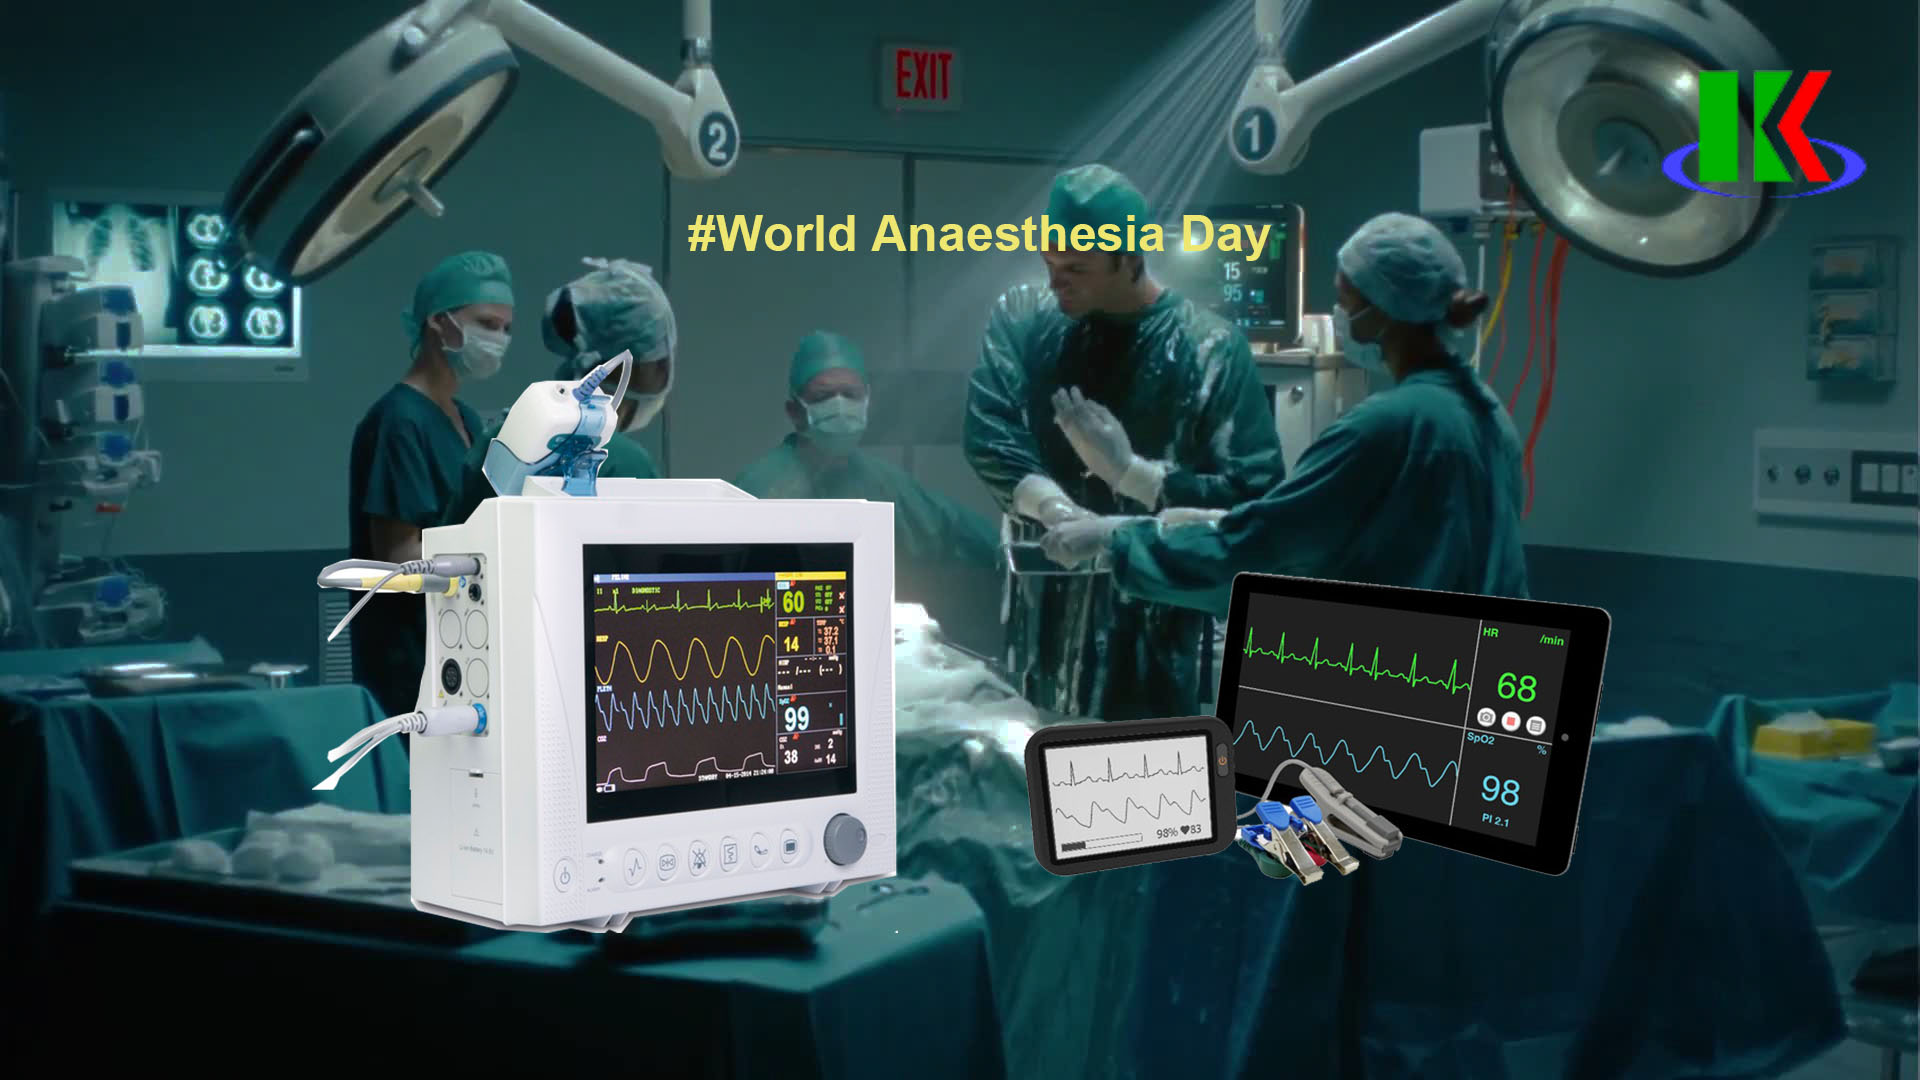 October 16th, World Anesthesia Day